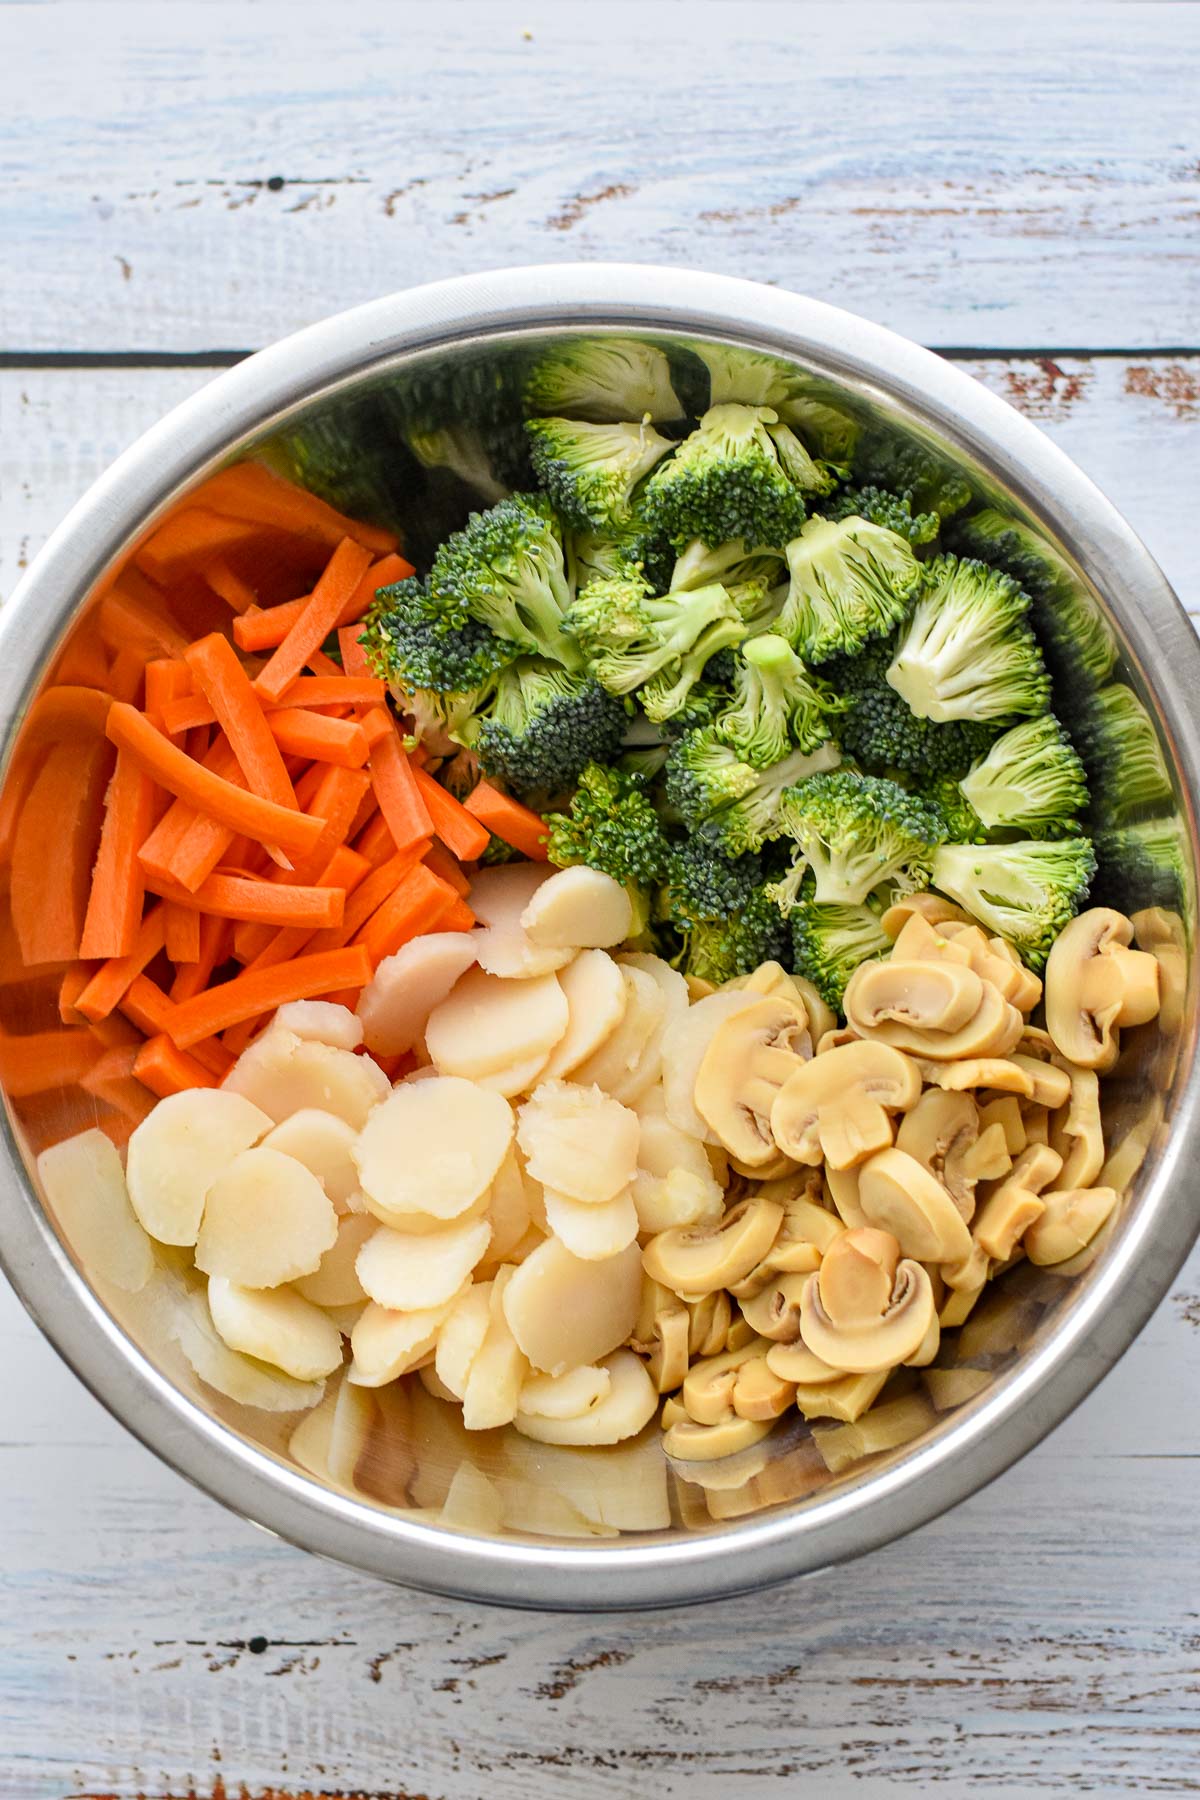 process shot of the veggies for low fodmap chicken stir fry including chopped broccoli heads, carrot matchsticks, and canned sliced water chestnuts and mushrooms